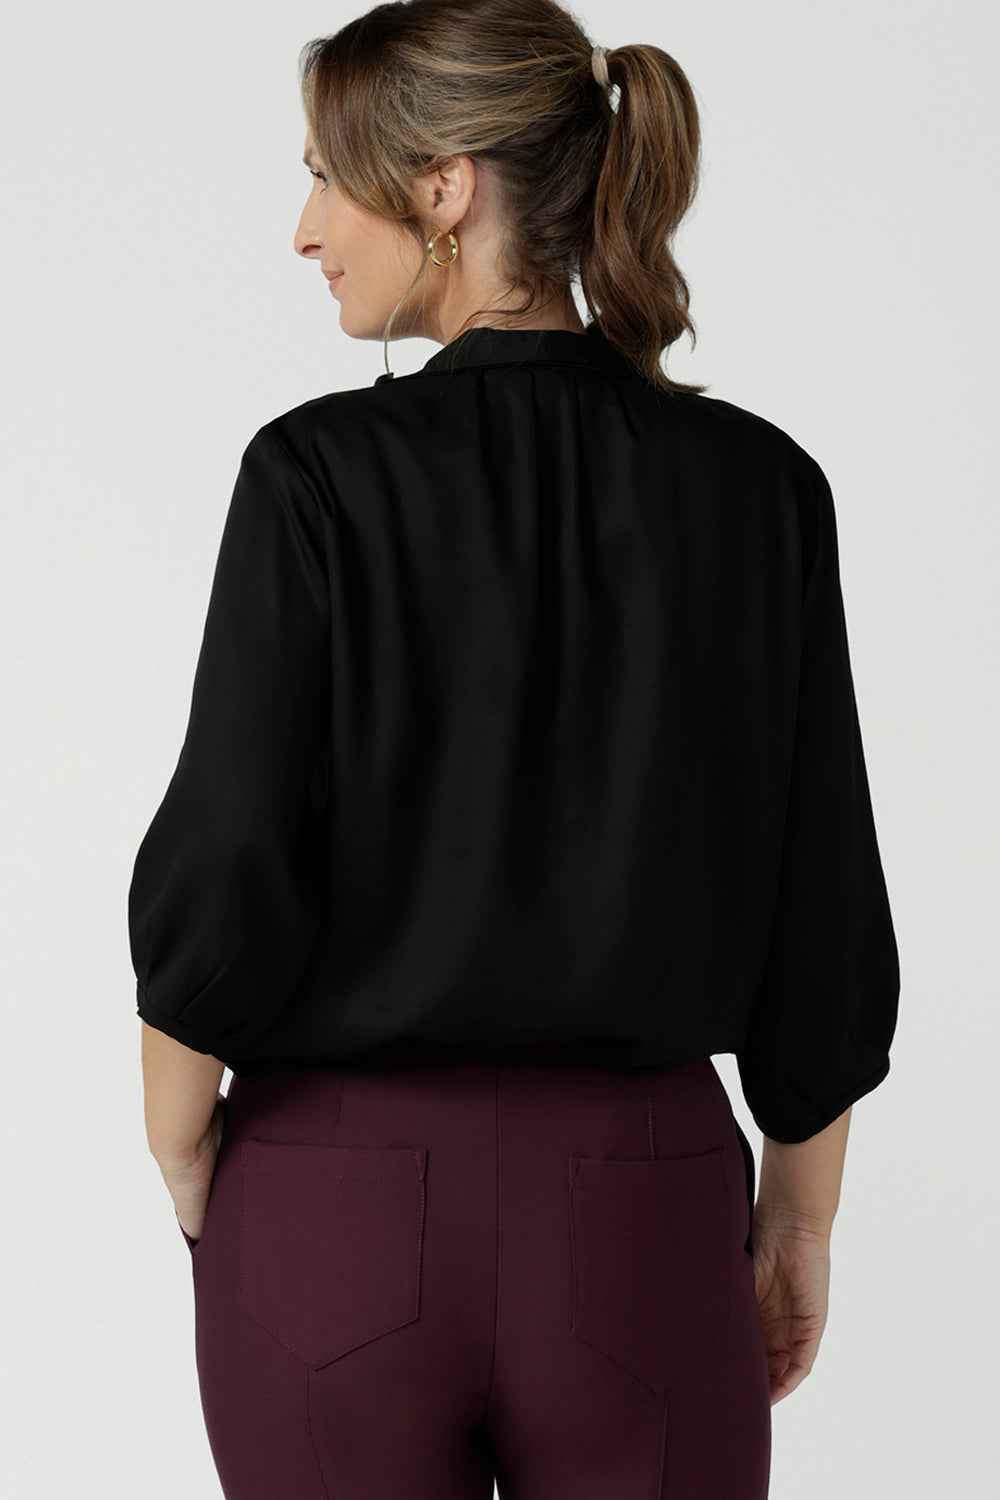 size 10  woman wearing a pull-on black shirt with 3/4. Made in Tencel fabric, the black shirt is lightweight, breathable and eco-conscious. Worn with mulberry pants, this shirt is great for casual wear as well as work. The shirt is Australian made for petite to plus size women.